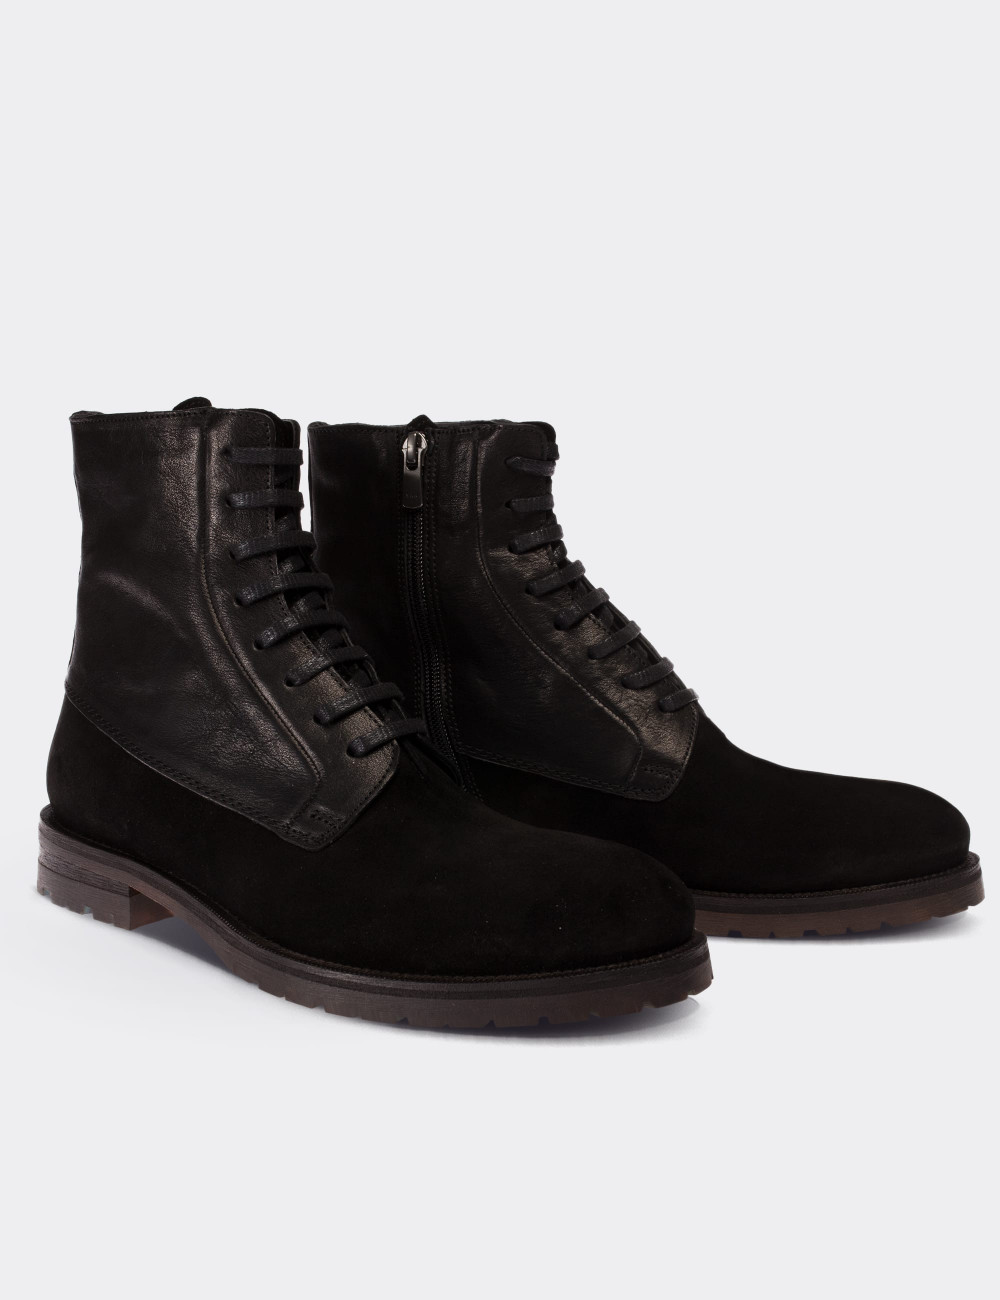 Black Suede Leather  Boots - 01324MSYHC01